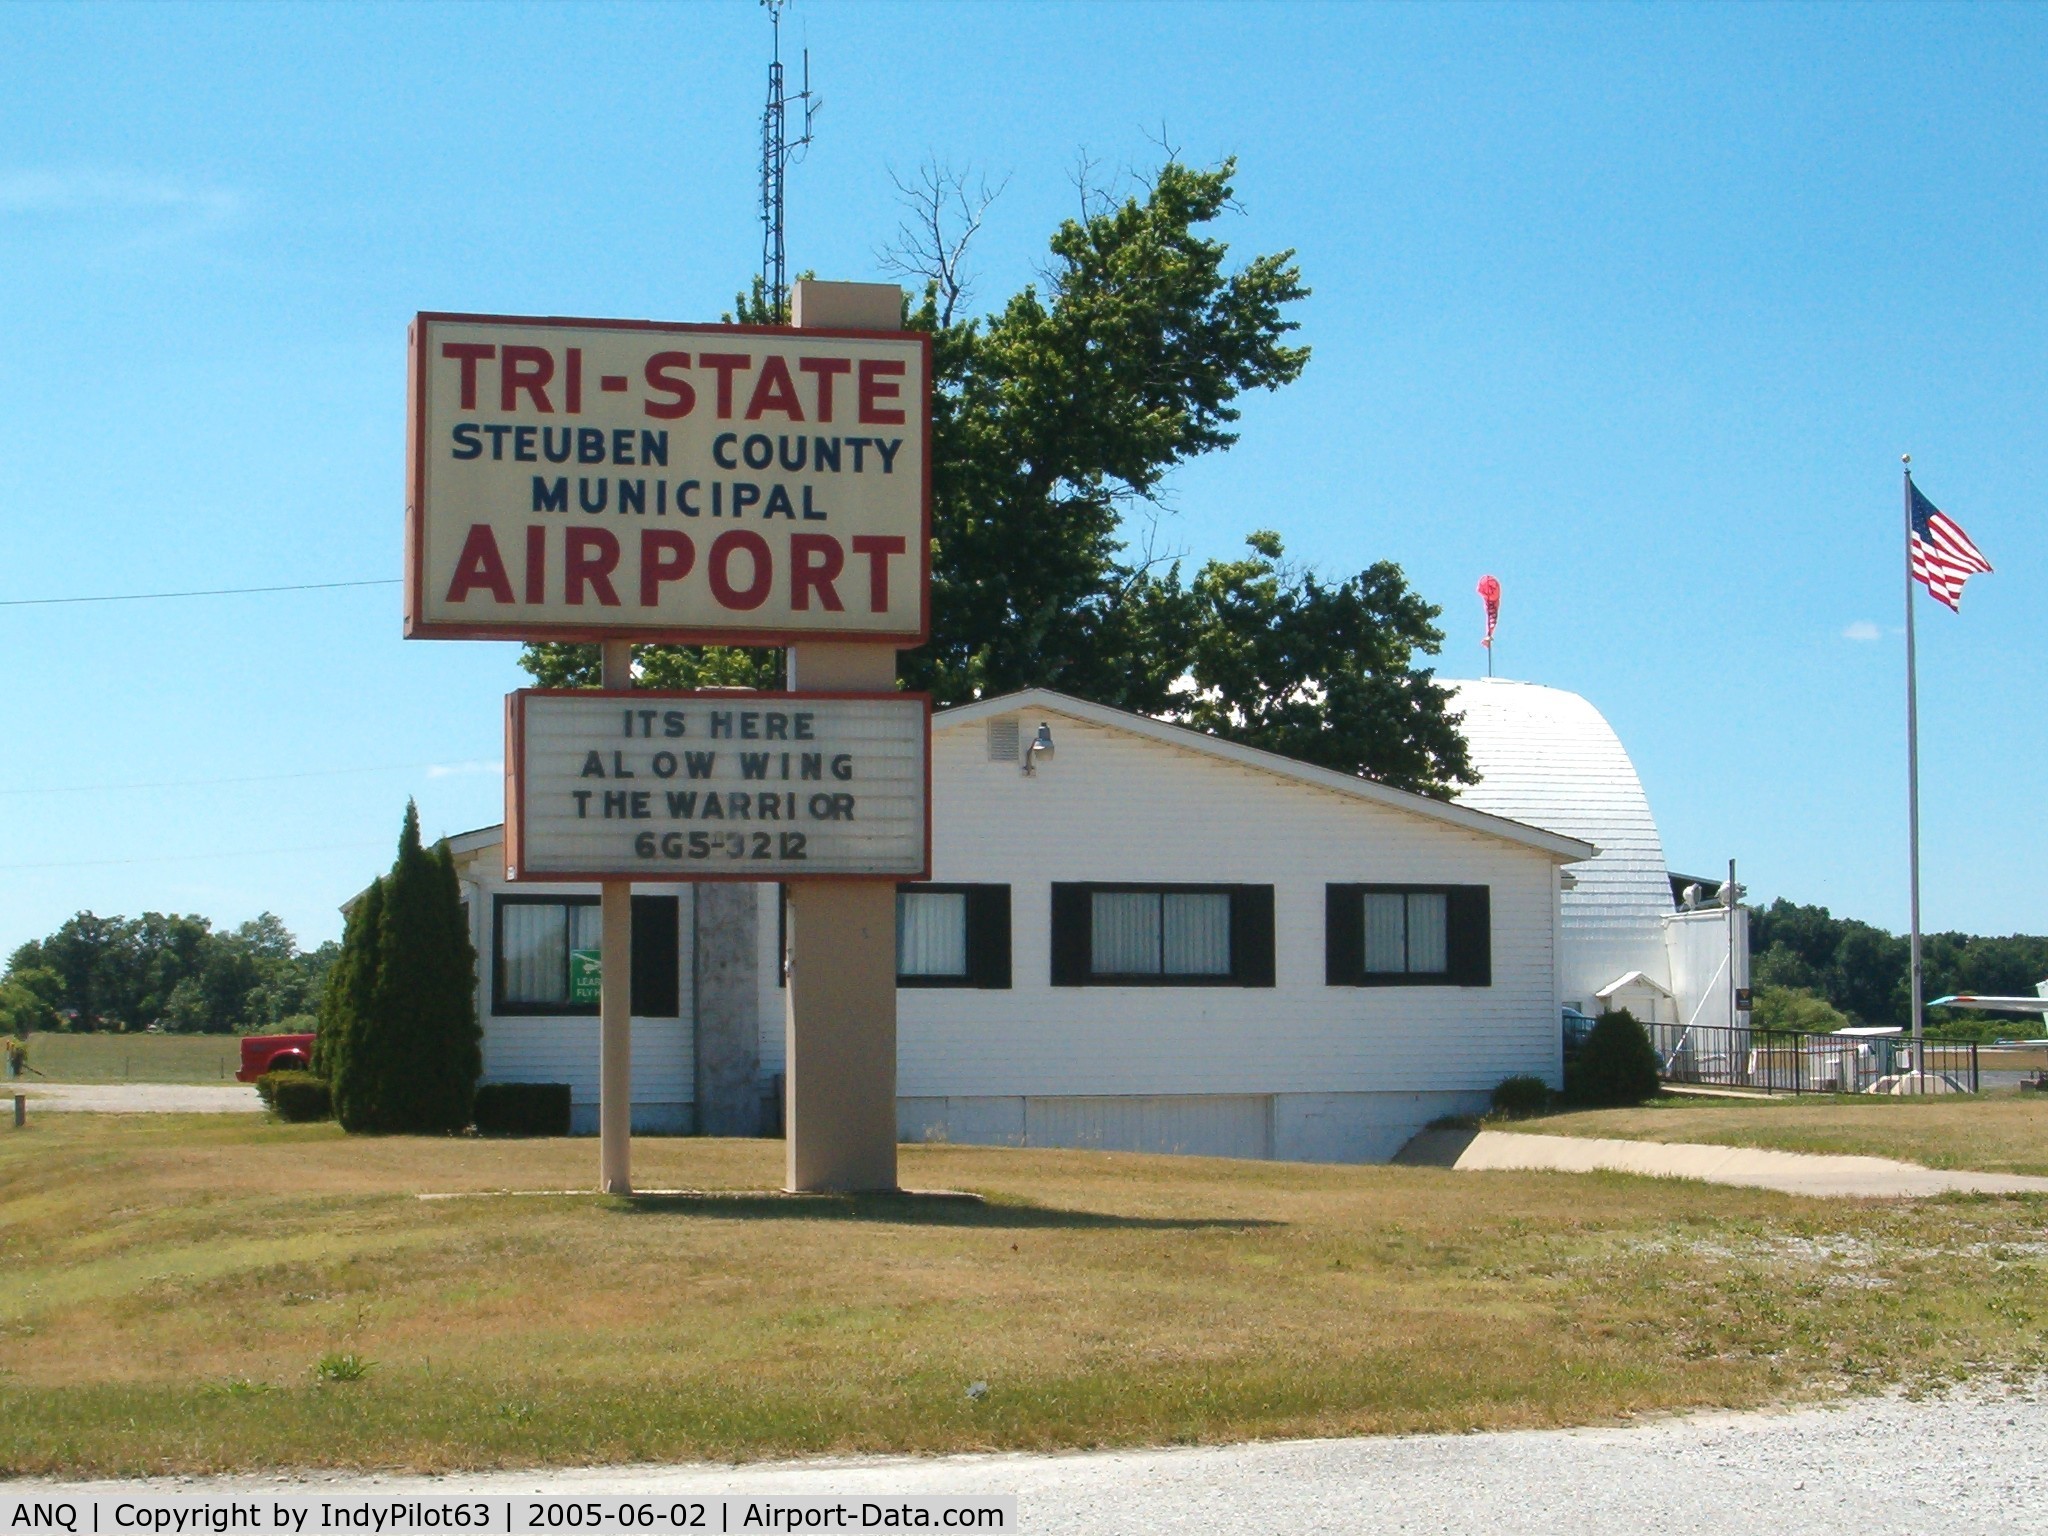 Tri-state Steuben County Airport (ANQ) - FBO with sign